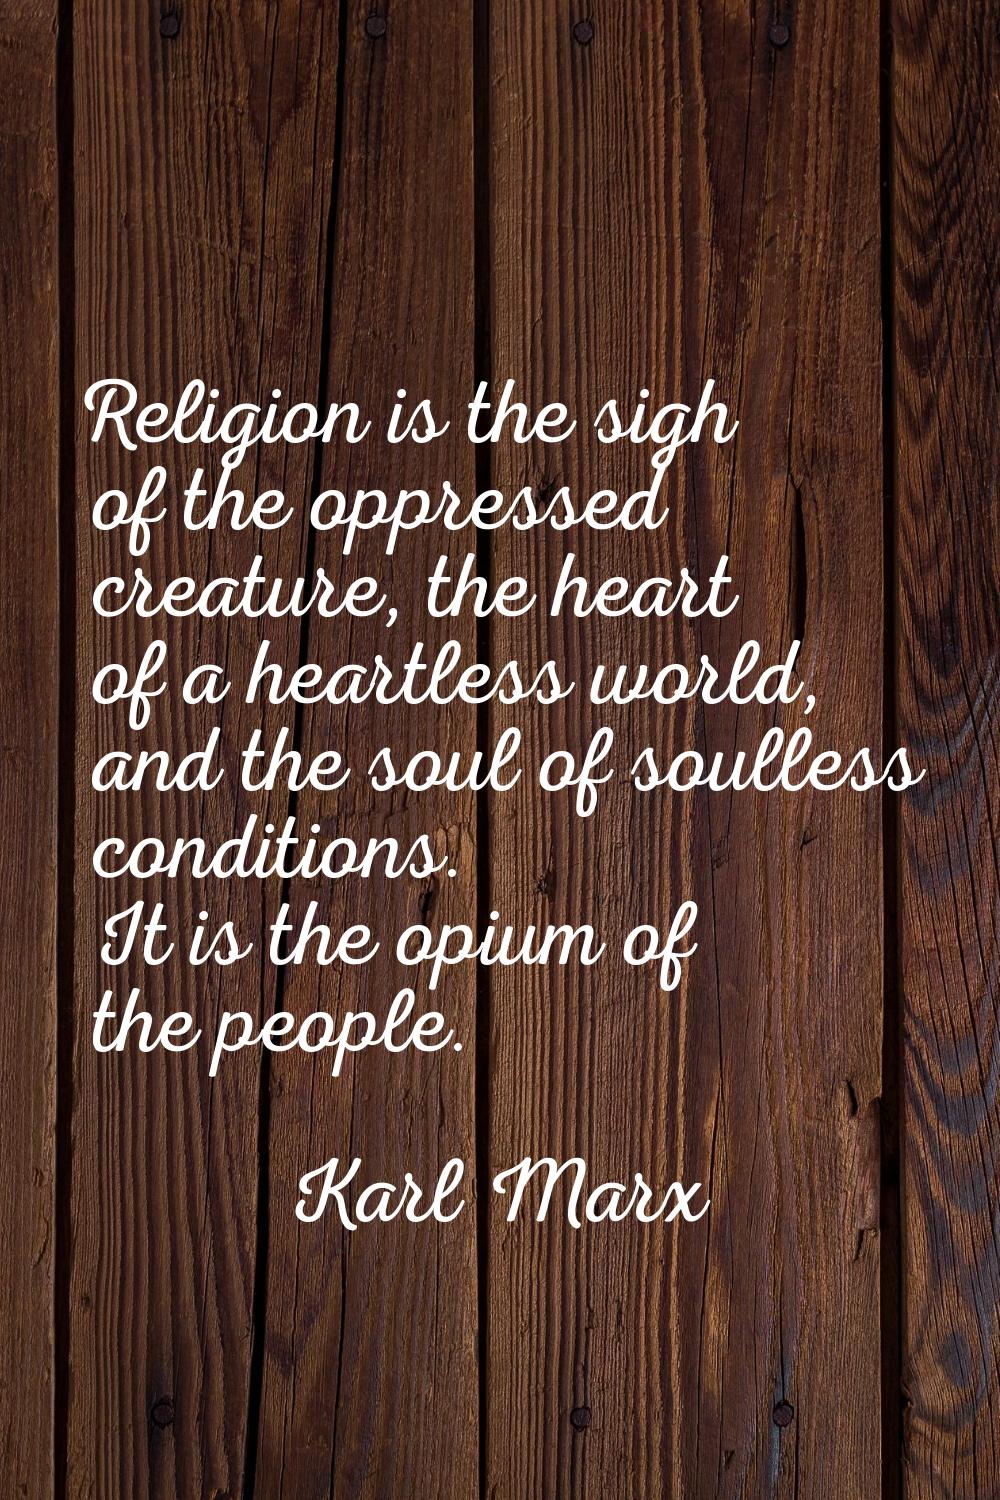 Religion is the sigh of the oppressed creature, the heart of a heartless world, and the soul of sou